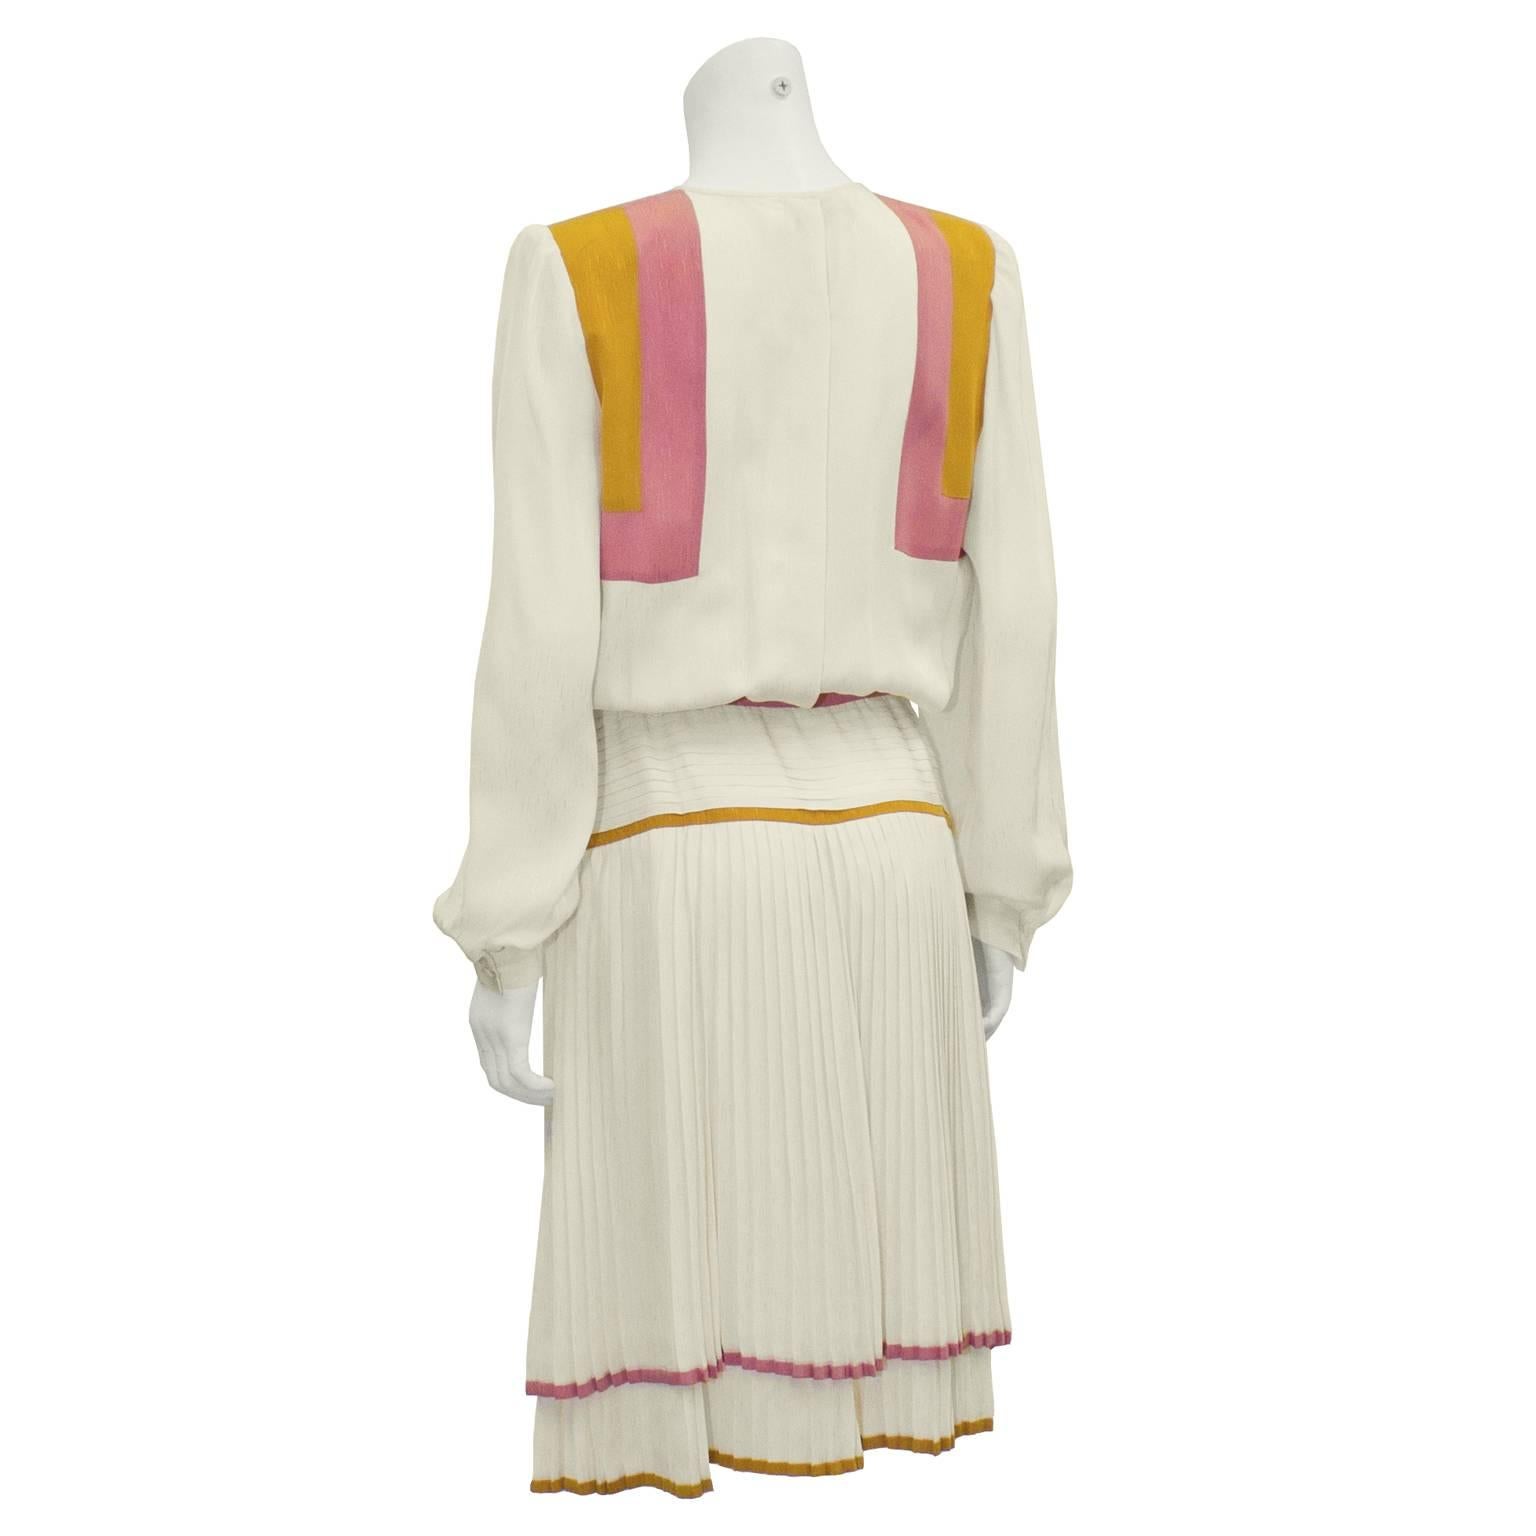 Beige 1980's Valentino Cream and Pink Dress with Pleated Skirt